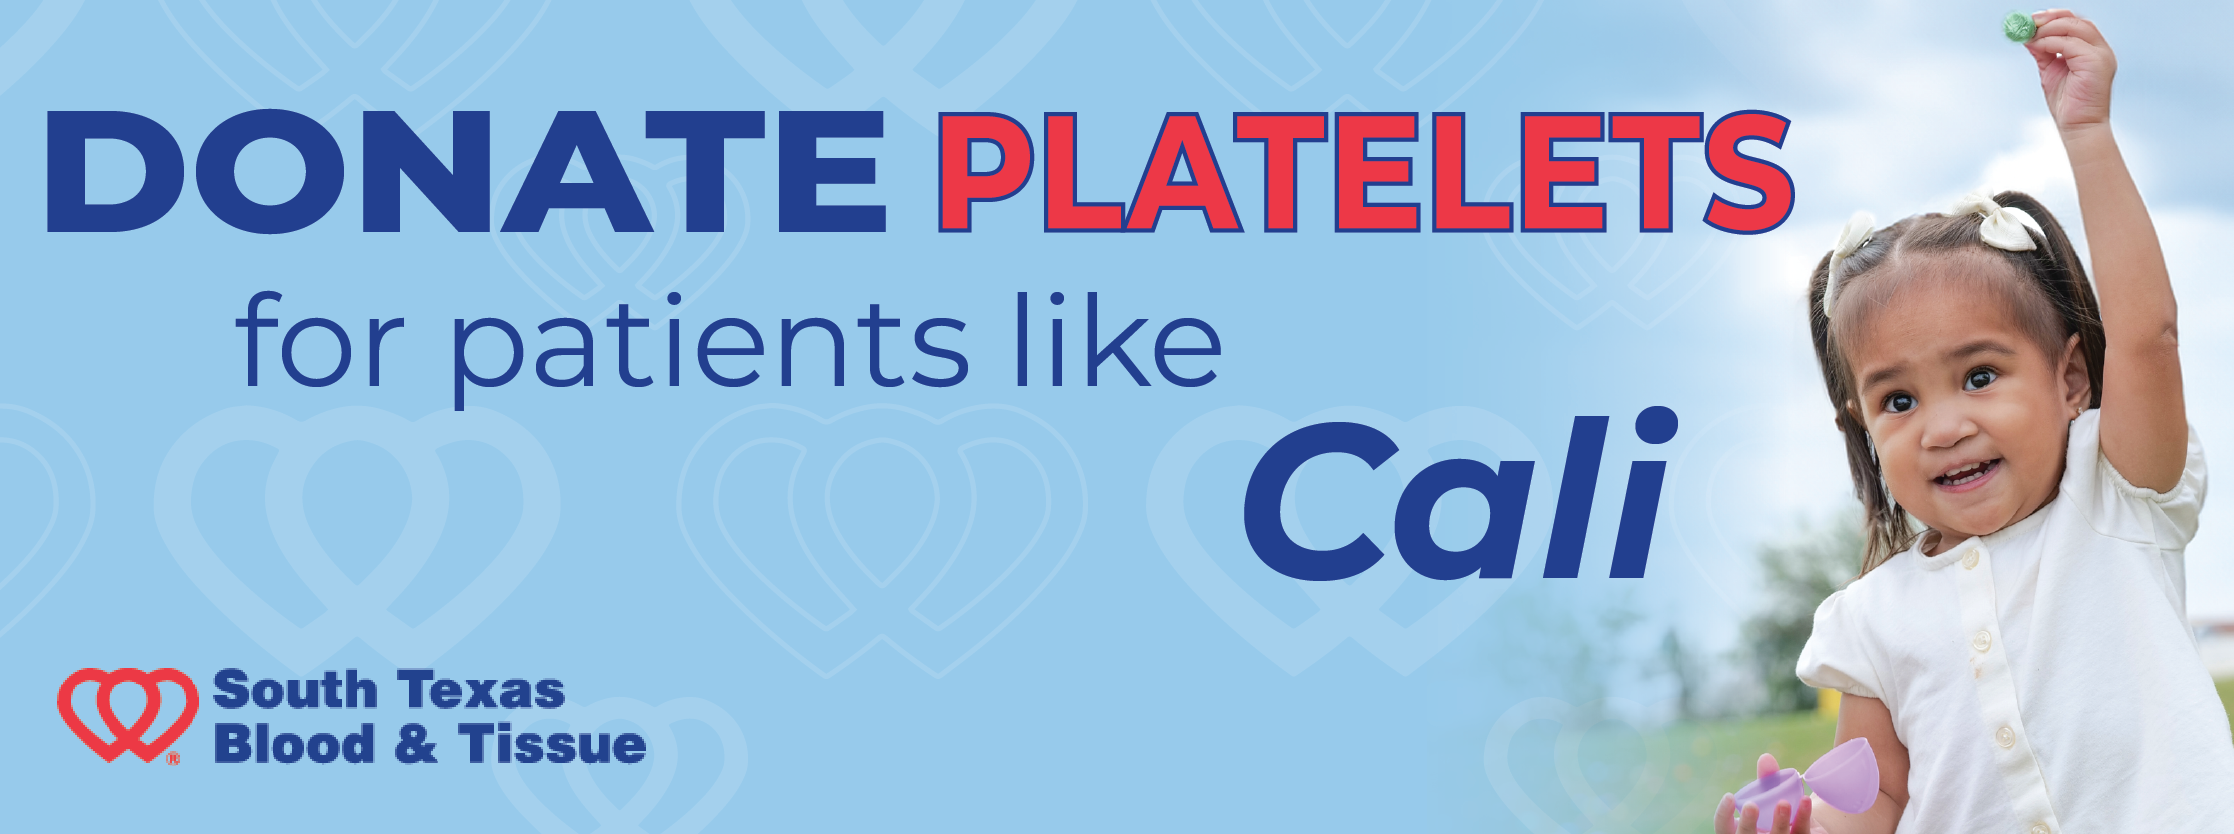 Donate platelets in honor of Cali